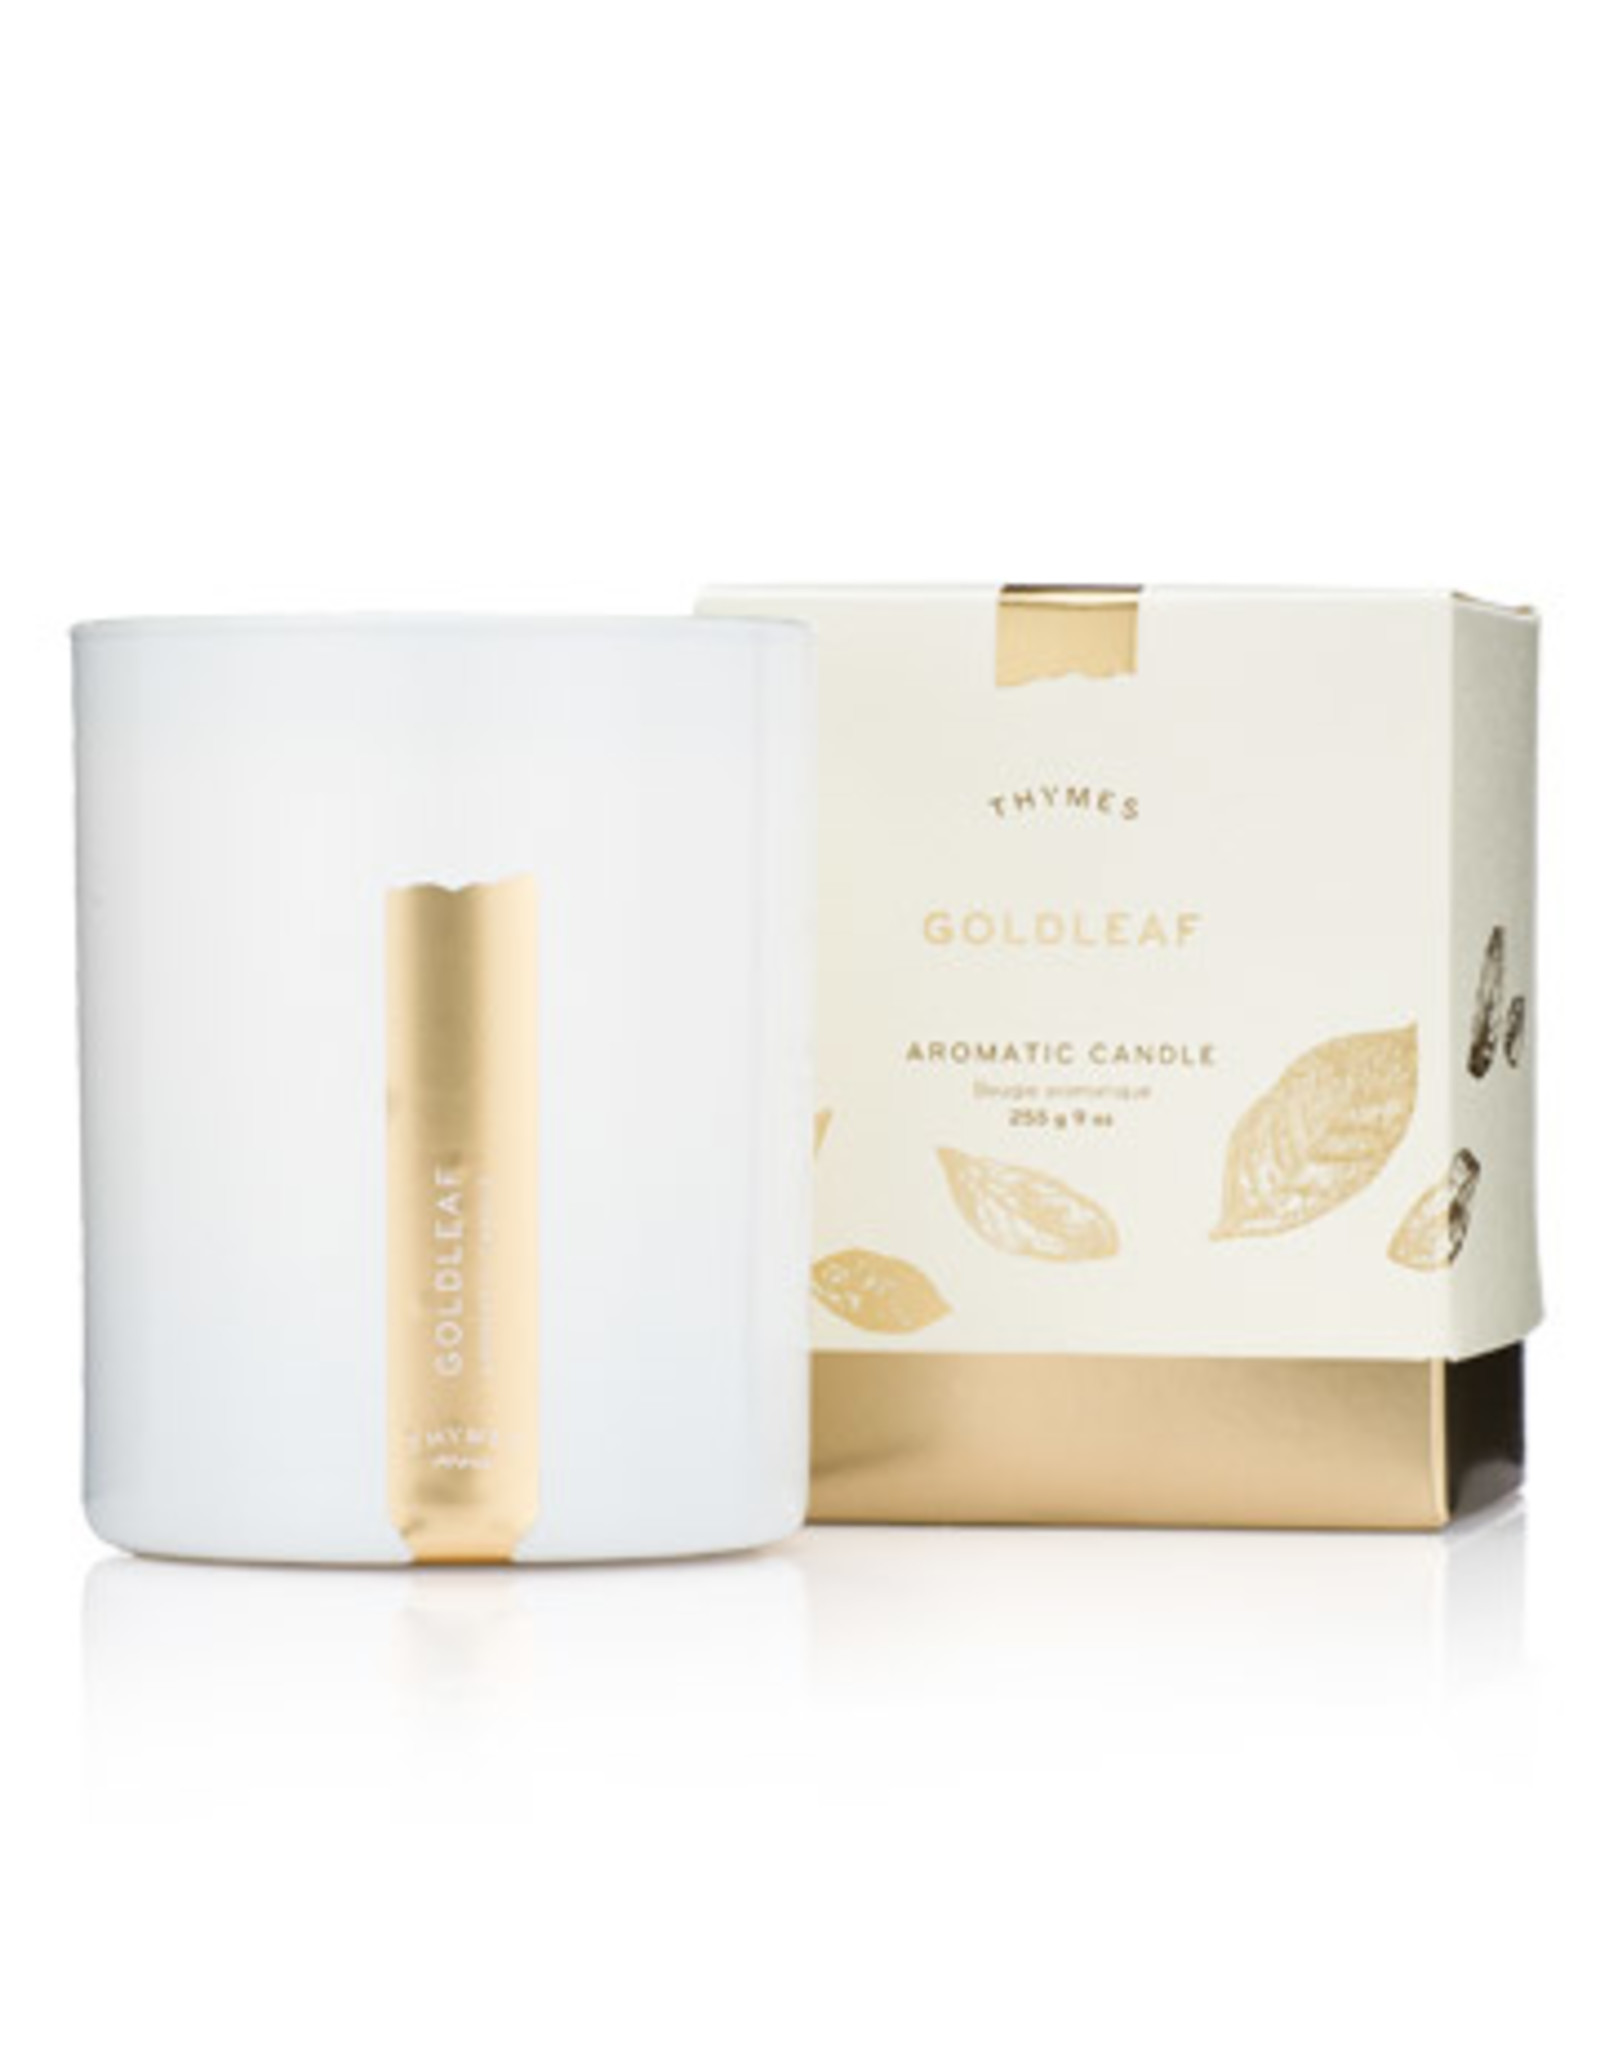 Thymes Goldleaf Aromatic Candle 7.5 oz